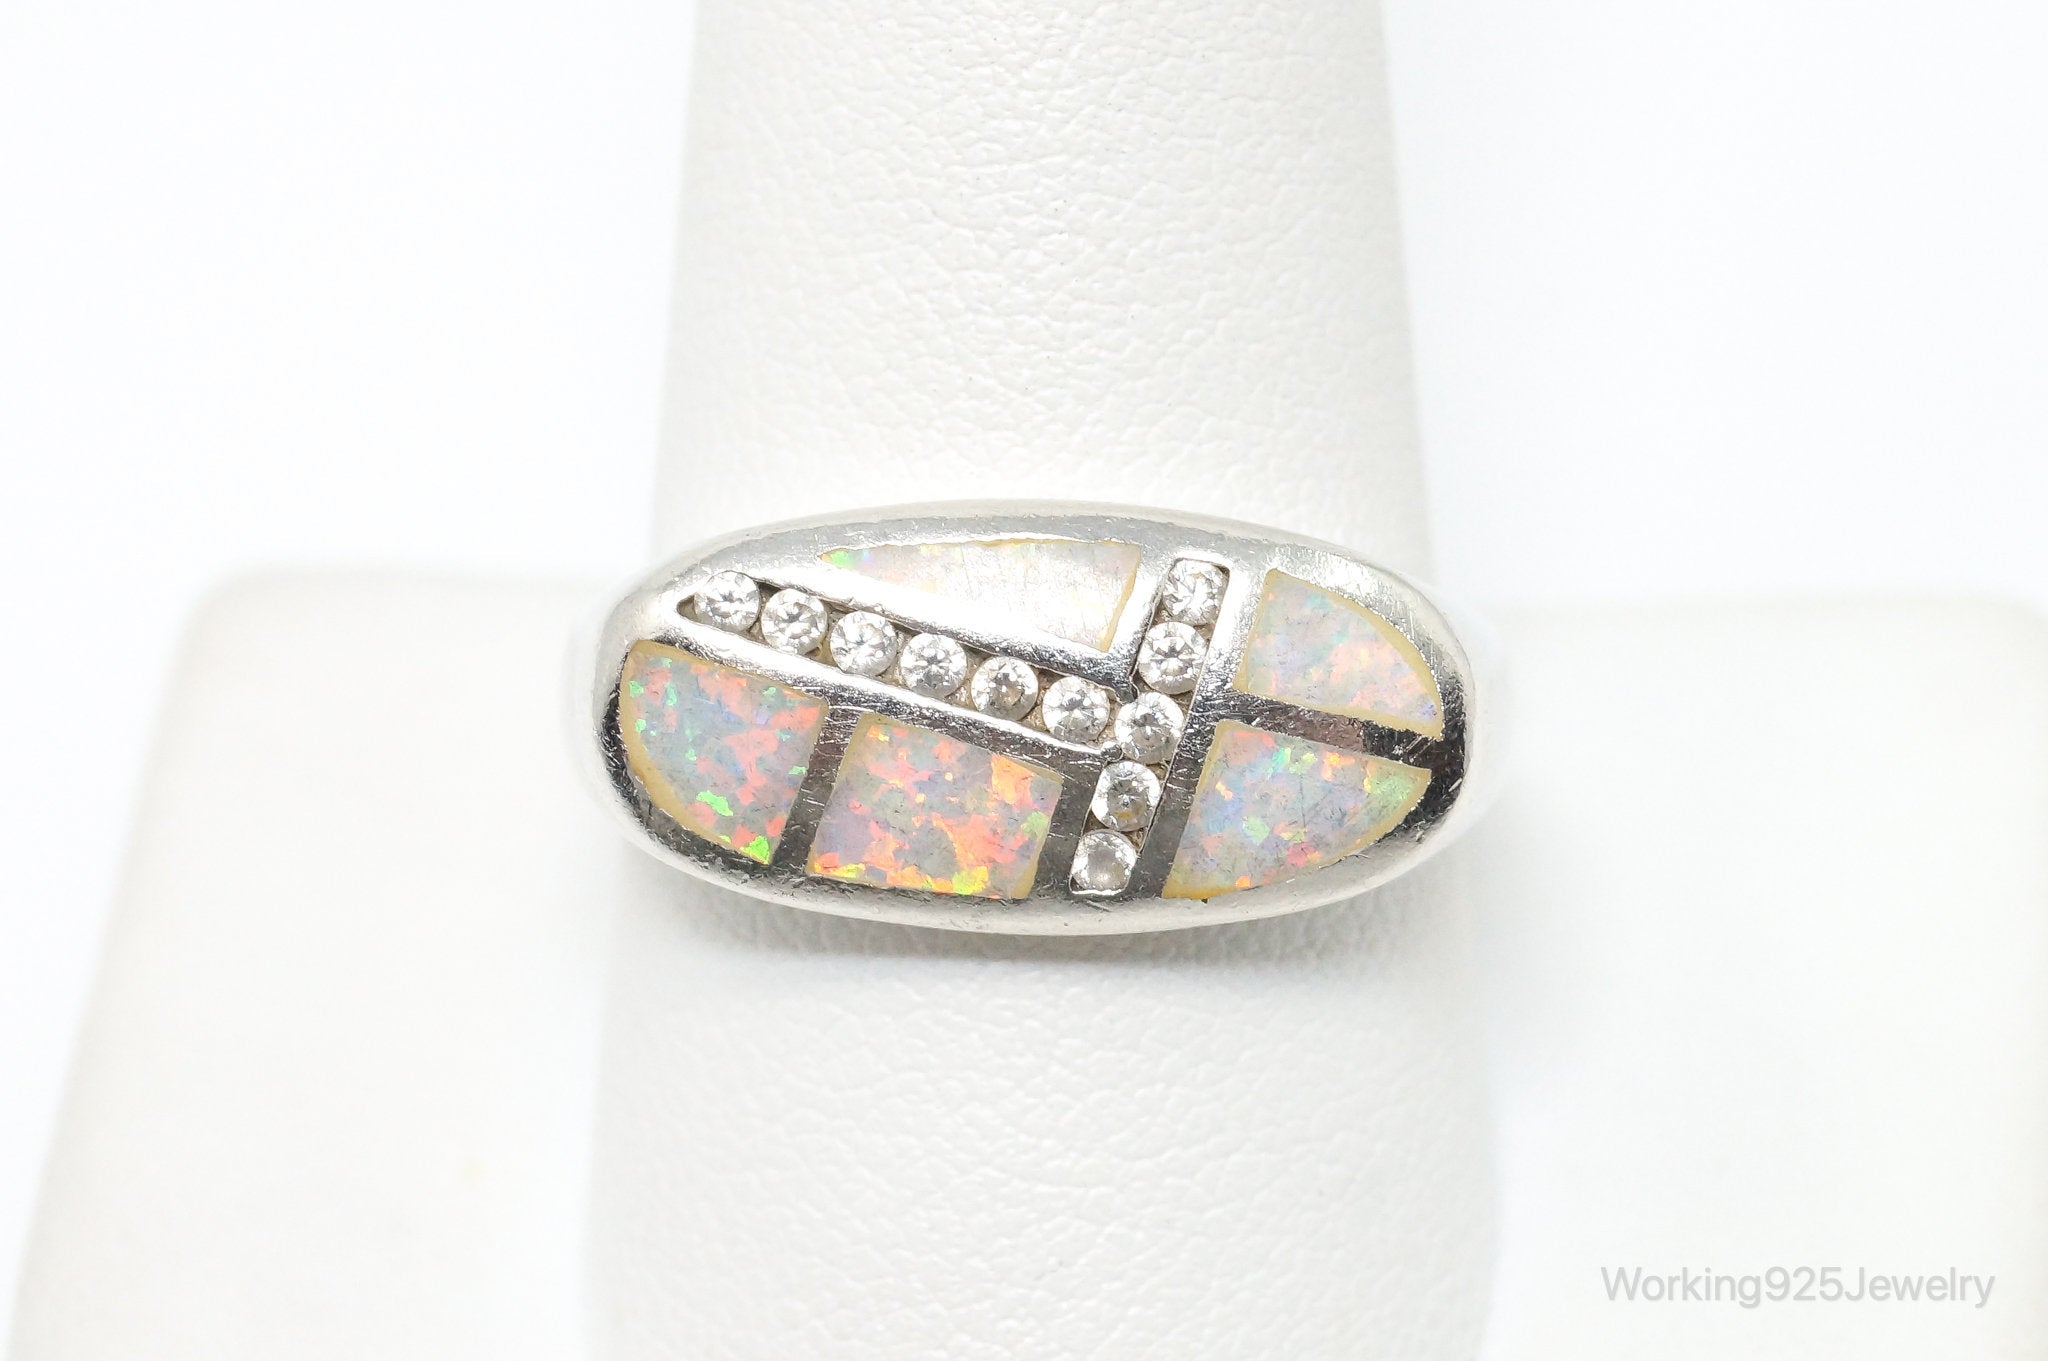 Vintage Art Deco Style Opal CZ Accented Sterling Silver Ring - Size 9.75